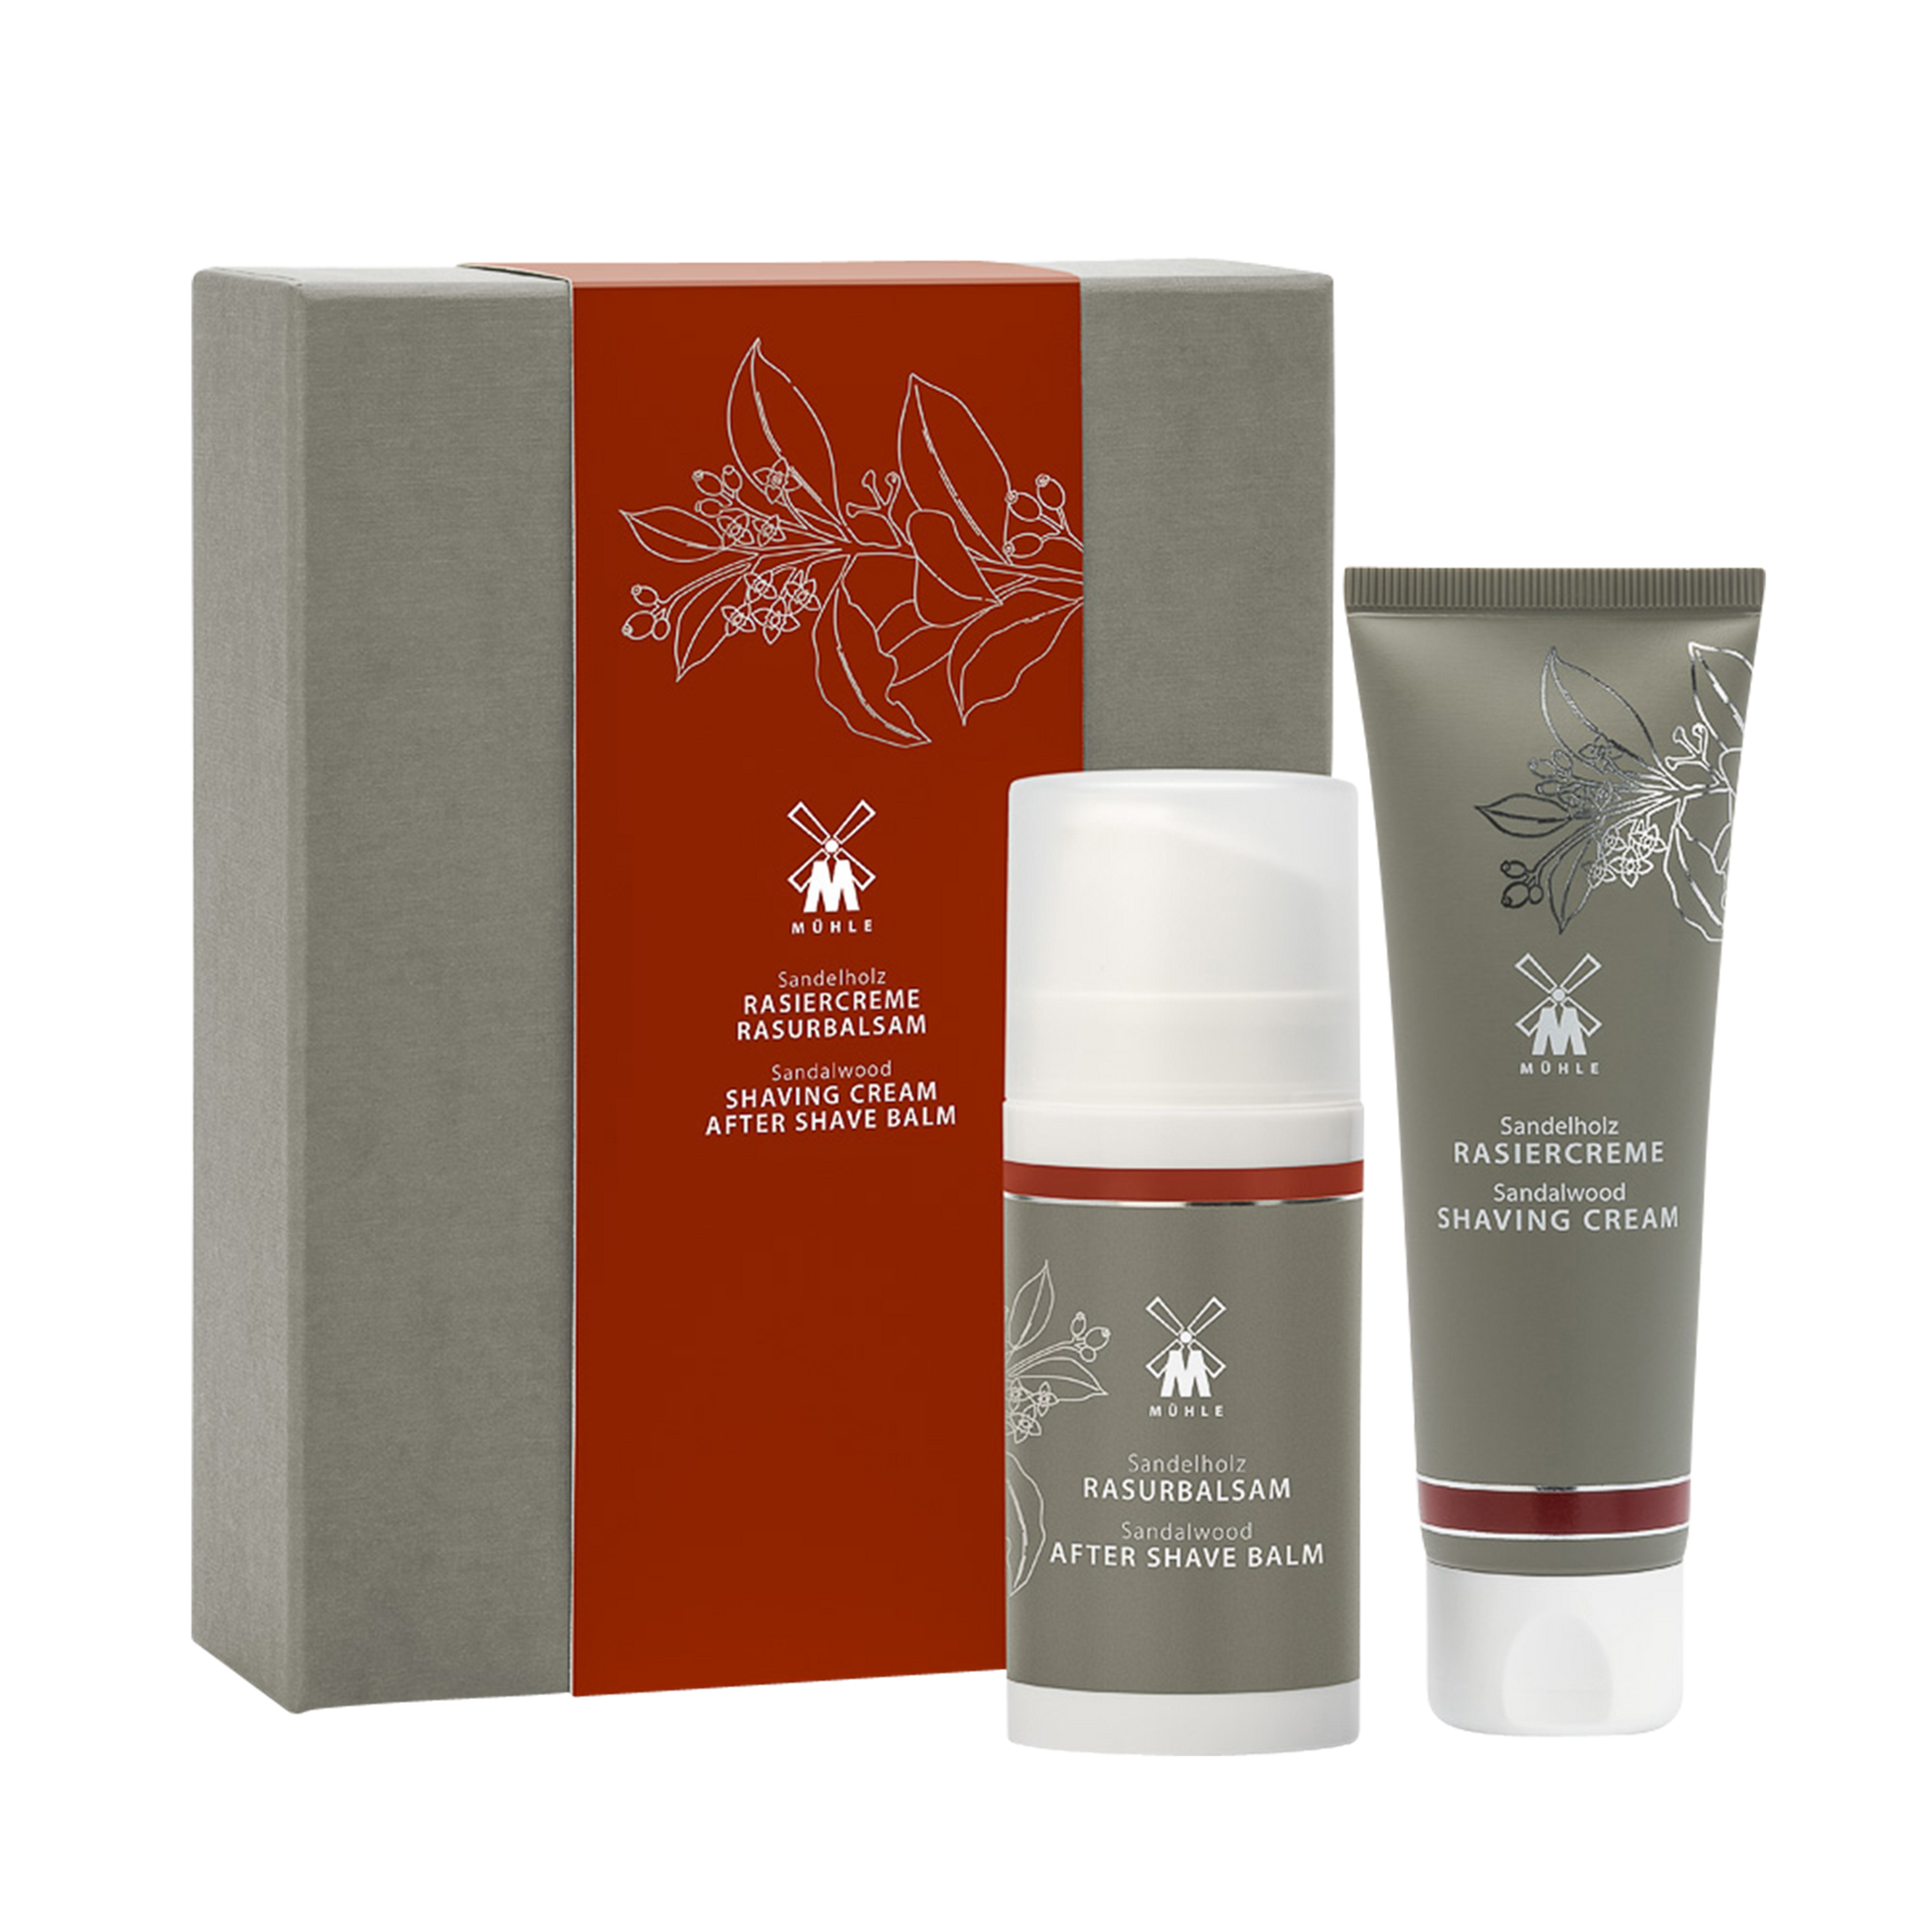 MUHLE Sandalwood Shaving Cream & Aftershave Balm Set: Suitable for normal to dry skin. Fragranced from essences of the Sandalwood Tree and refined through a multi-stage distillation process, this skin care set relieves irritation and dryness. Classy and distinctive, this fragrance contains fine notes of coriander, star anise and deep balsamic wood.